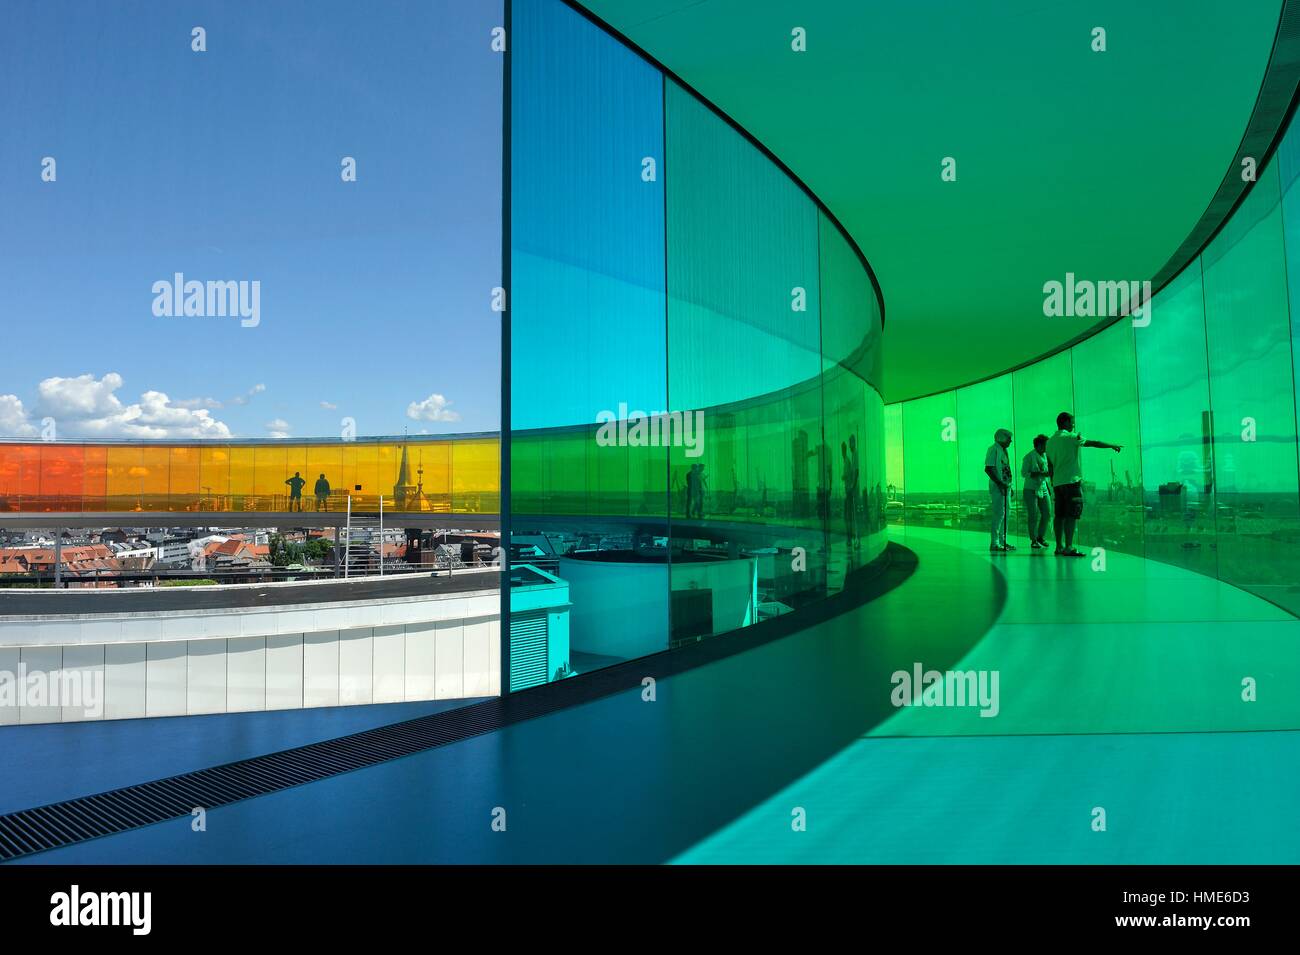 the installation ´´Your rainbow panorama´´, a circular skywalk with windows in the colors of the rainbow (by Olafur Eliasson, a Danish-Icelandic Stock Photo